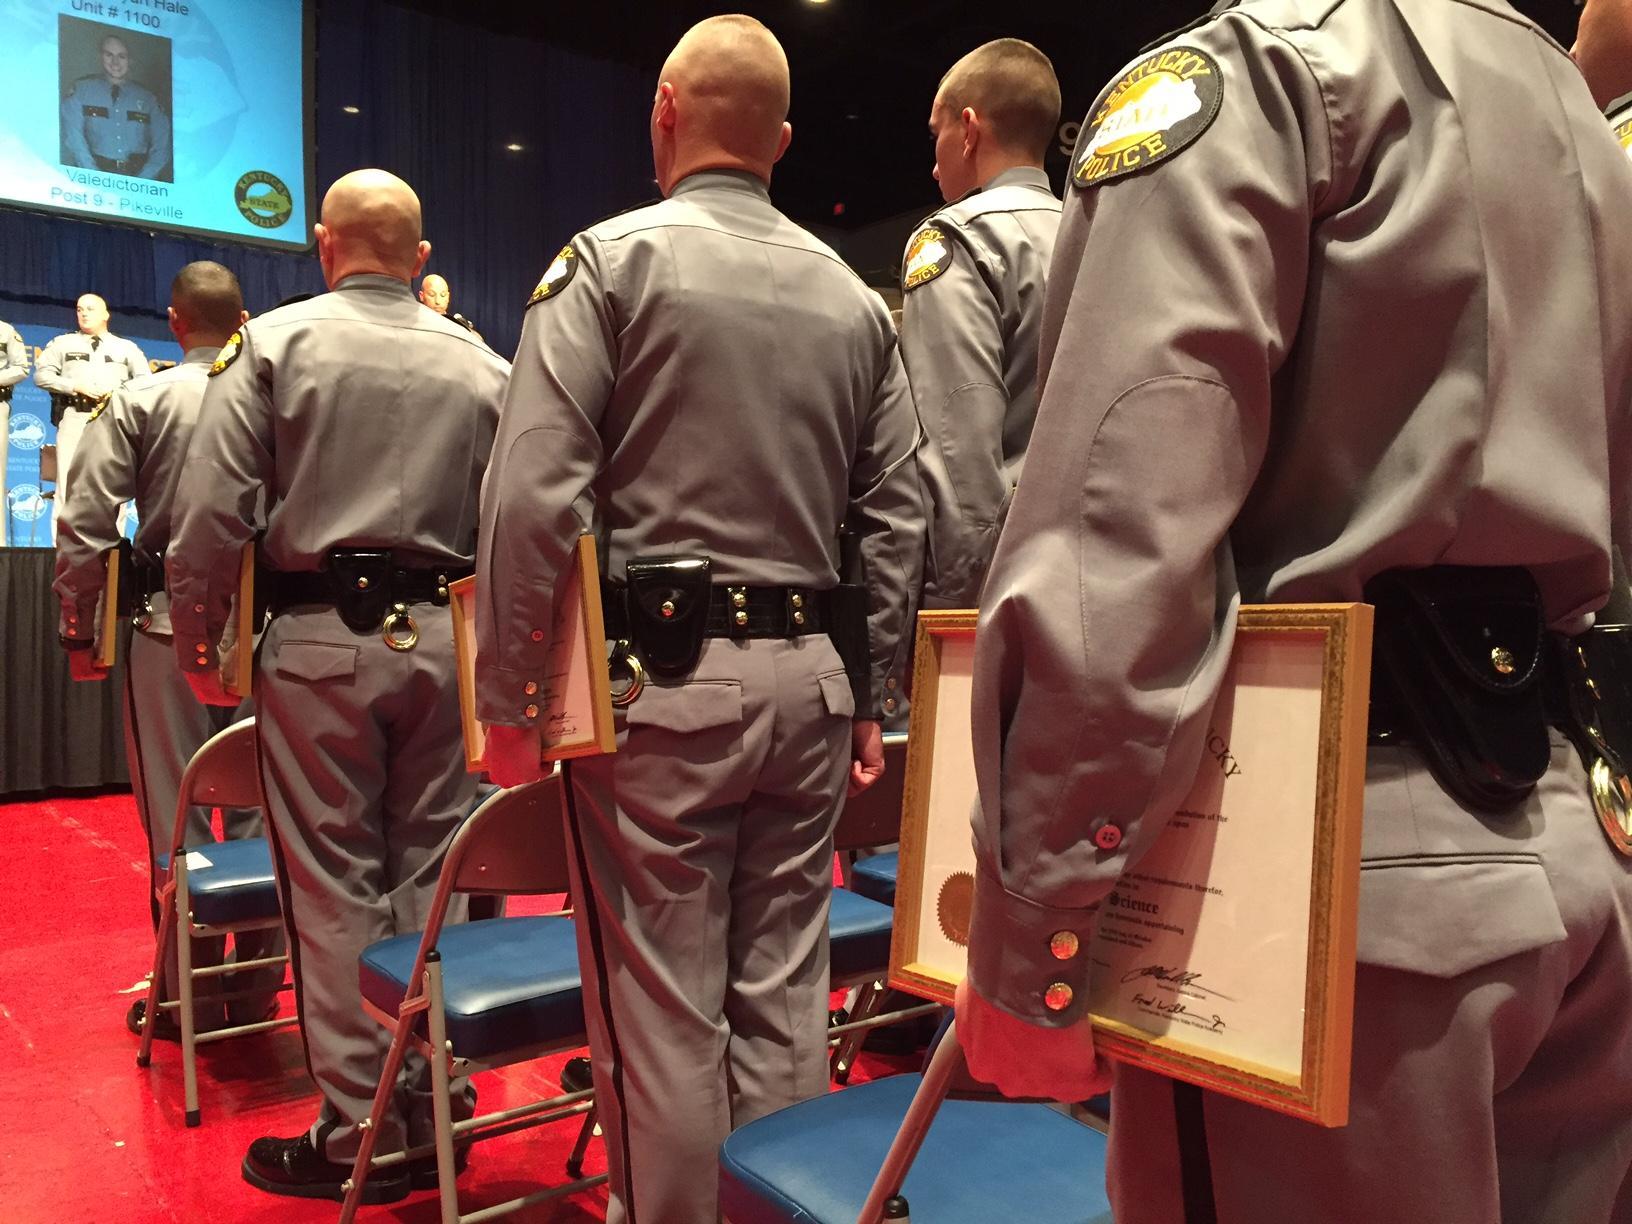 Kentucky State Police 45 New Faces WUKY